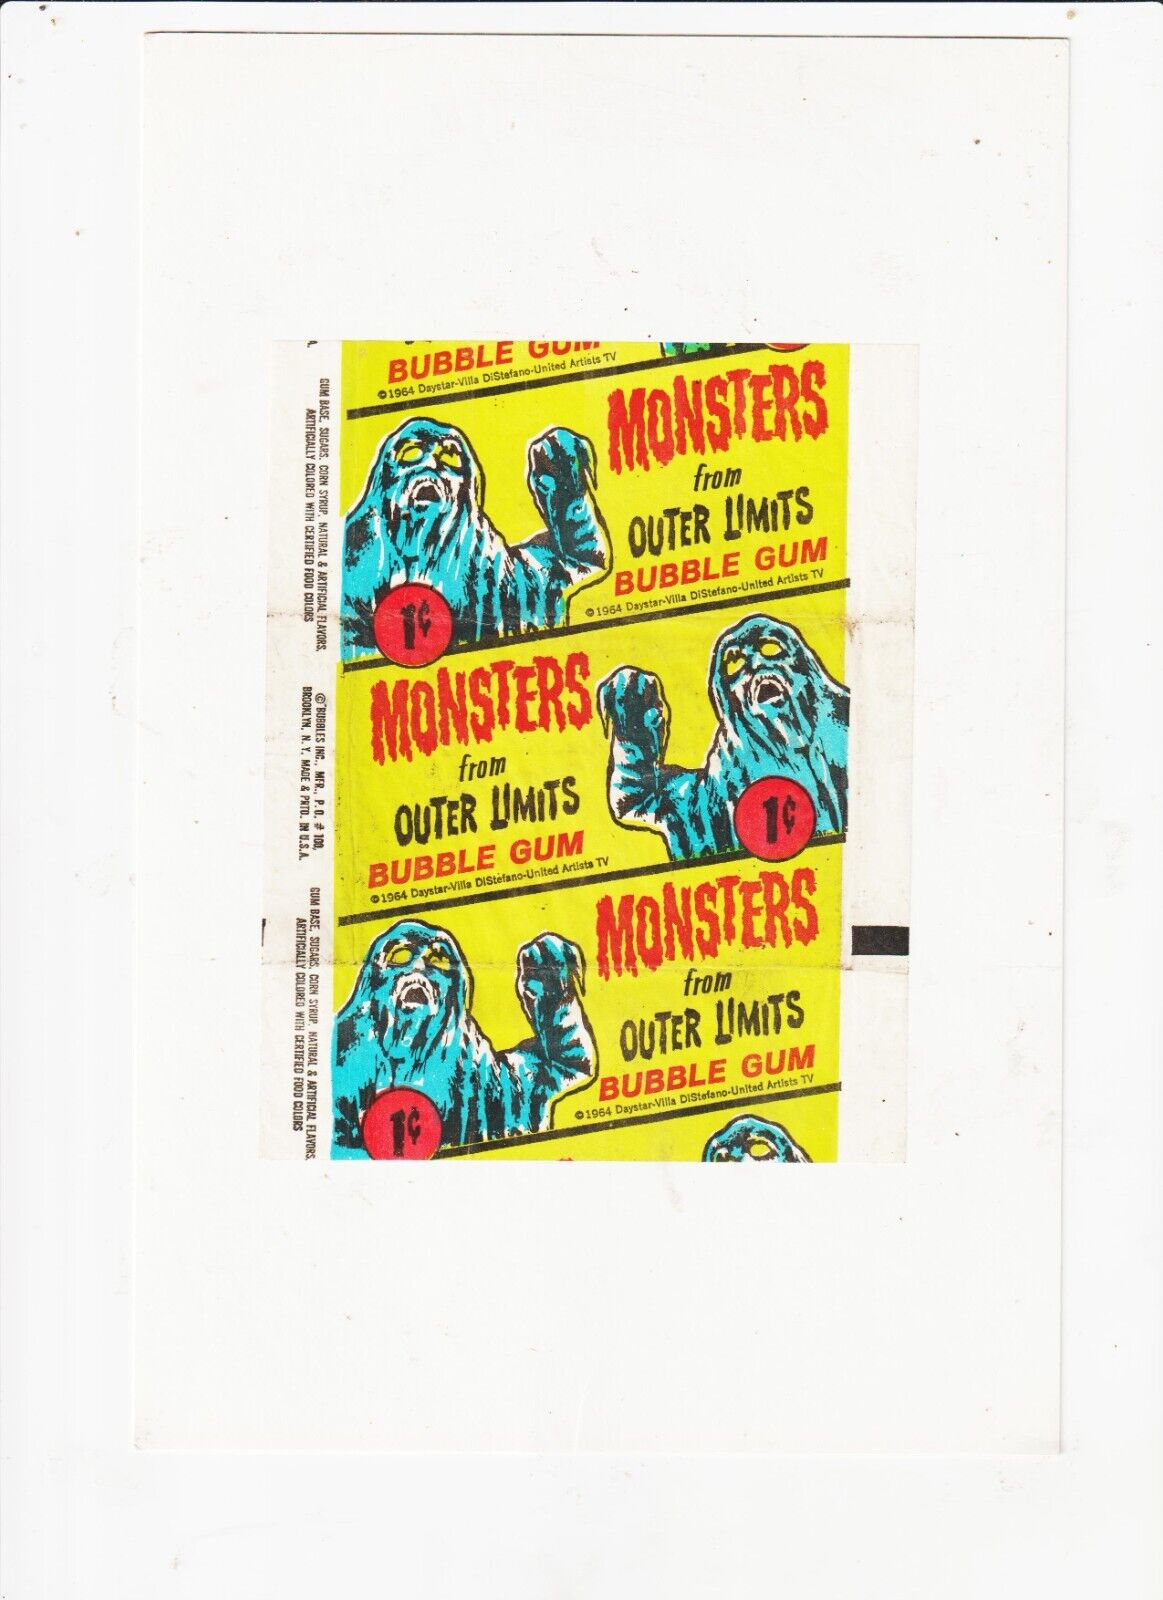 MONSTERS FROM OUTER LIMITS 1964 TOPPS CARDS  1 CENTS WAX WRAPPER  / WRAPPER ONLY